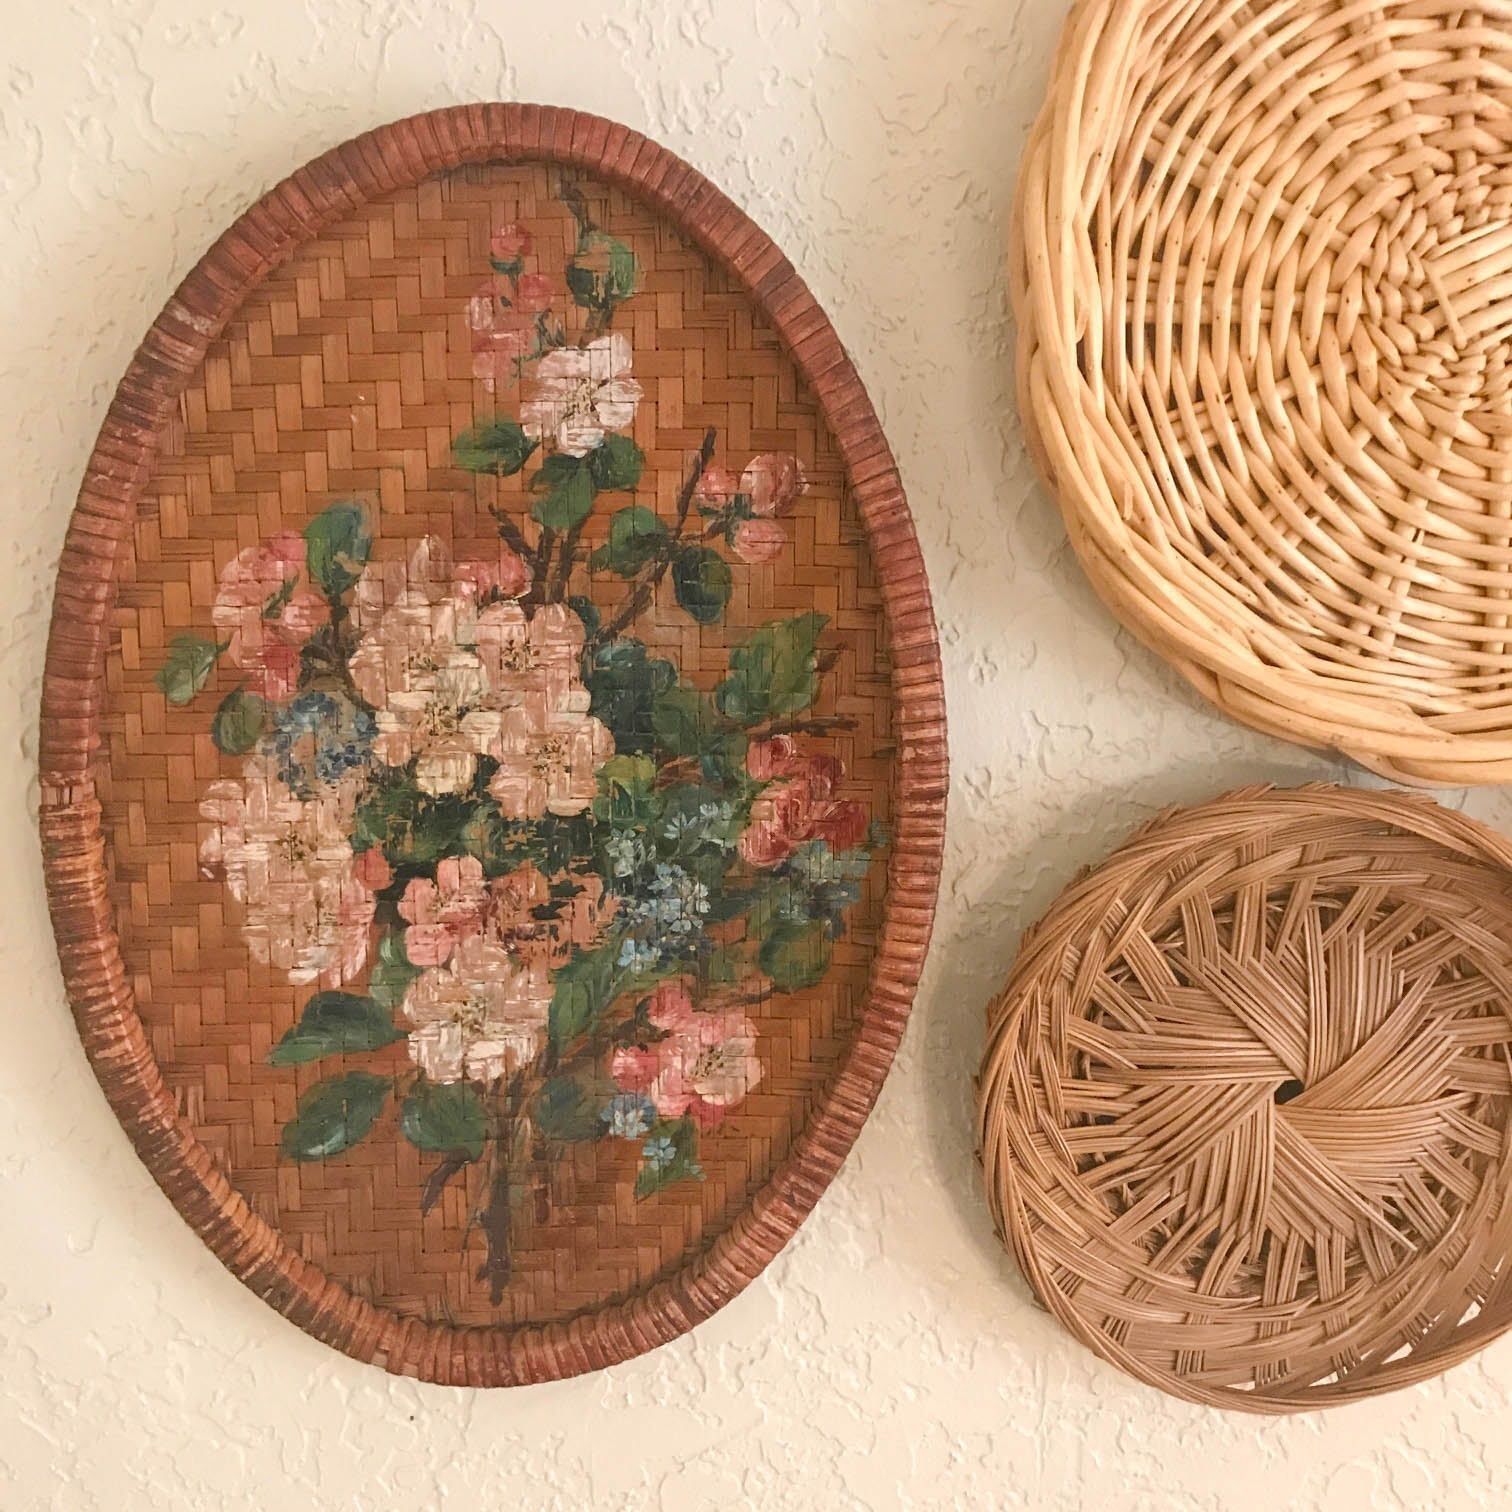 Vintage Wicker Wall Art, Basket Wall Decor, Painted Wicker Wall With Regard To Woven Basket Wall Art (View 12 of 20)